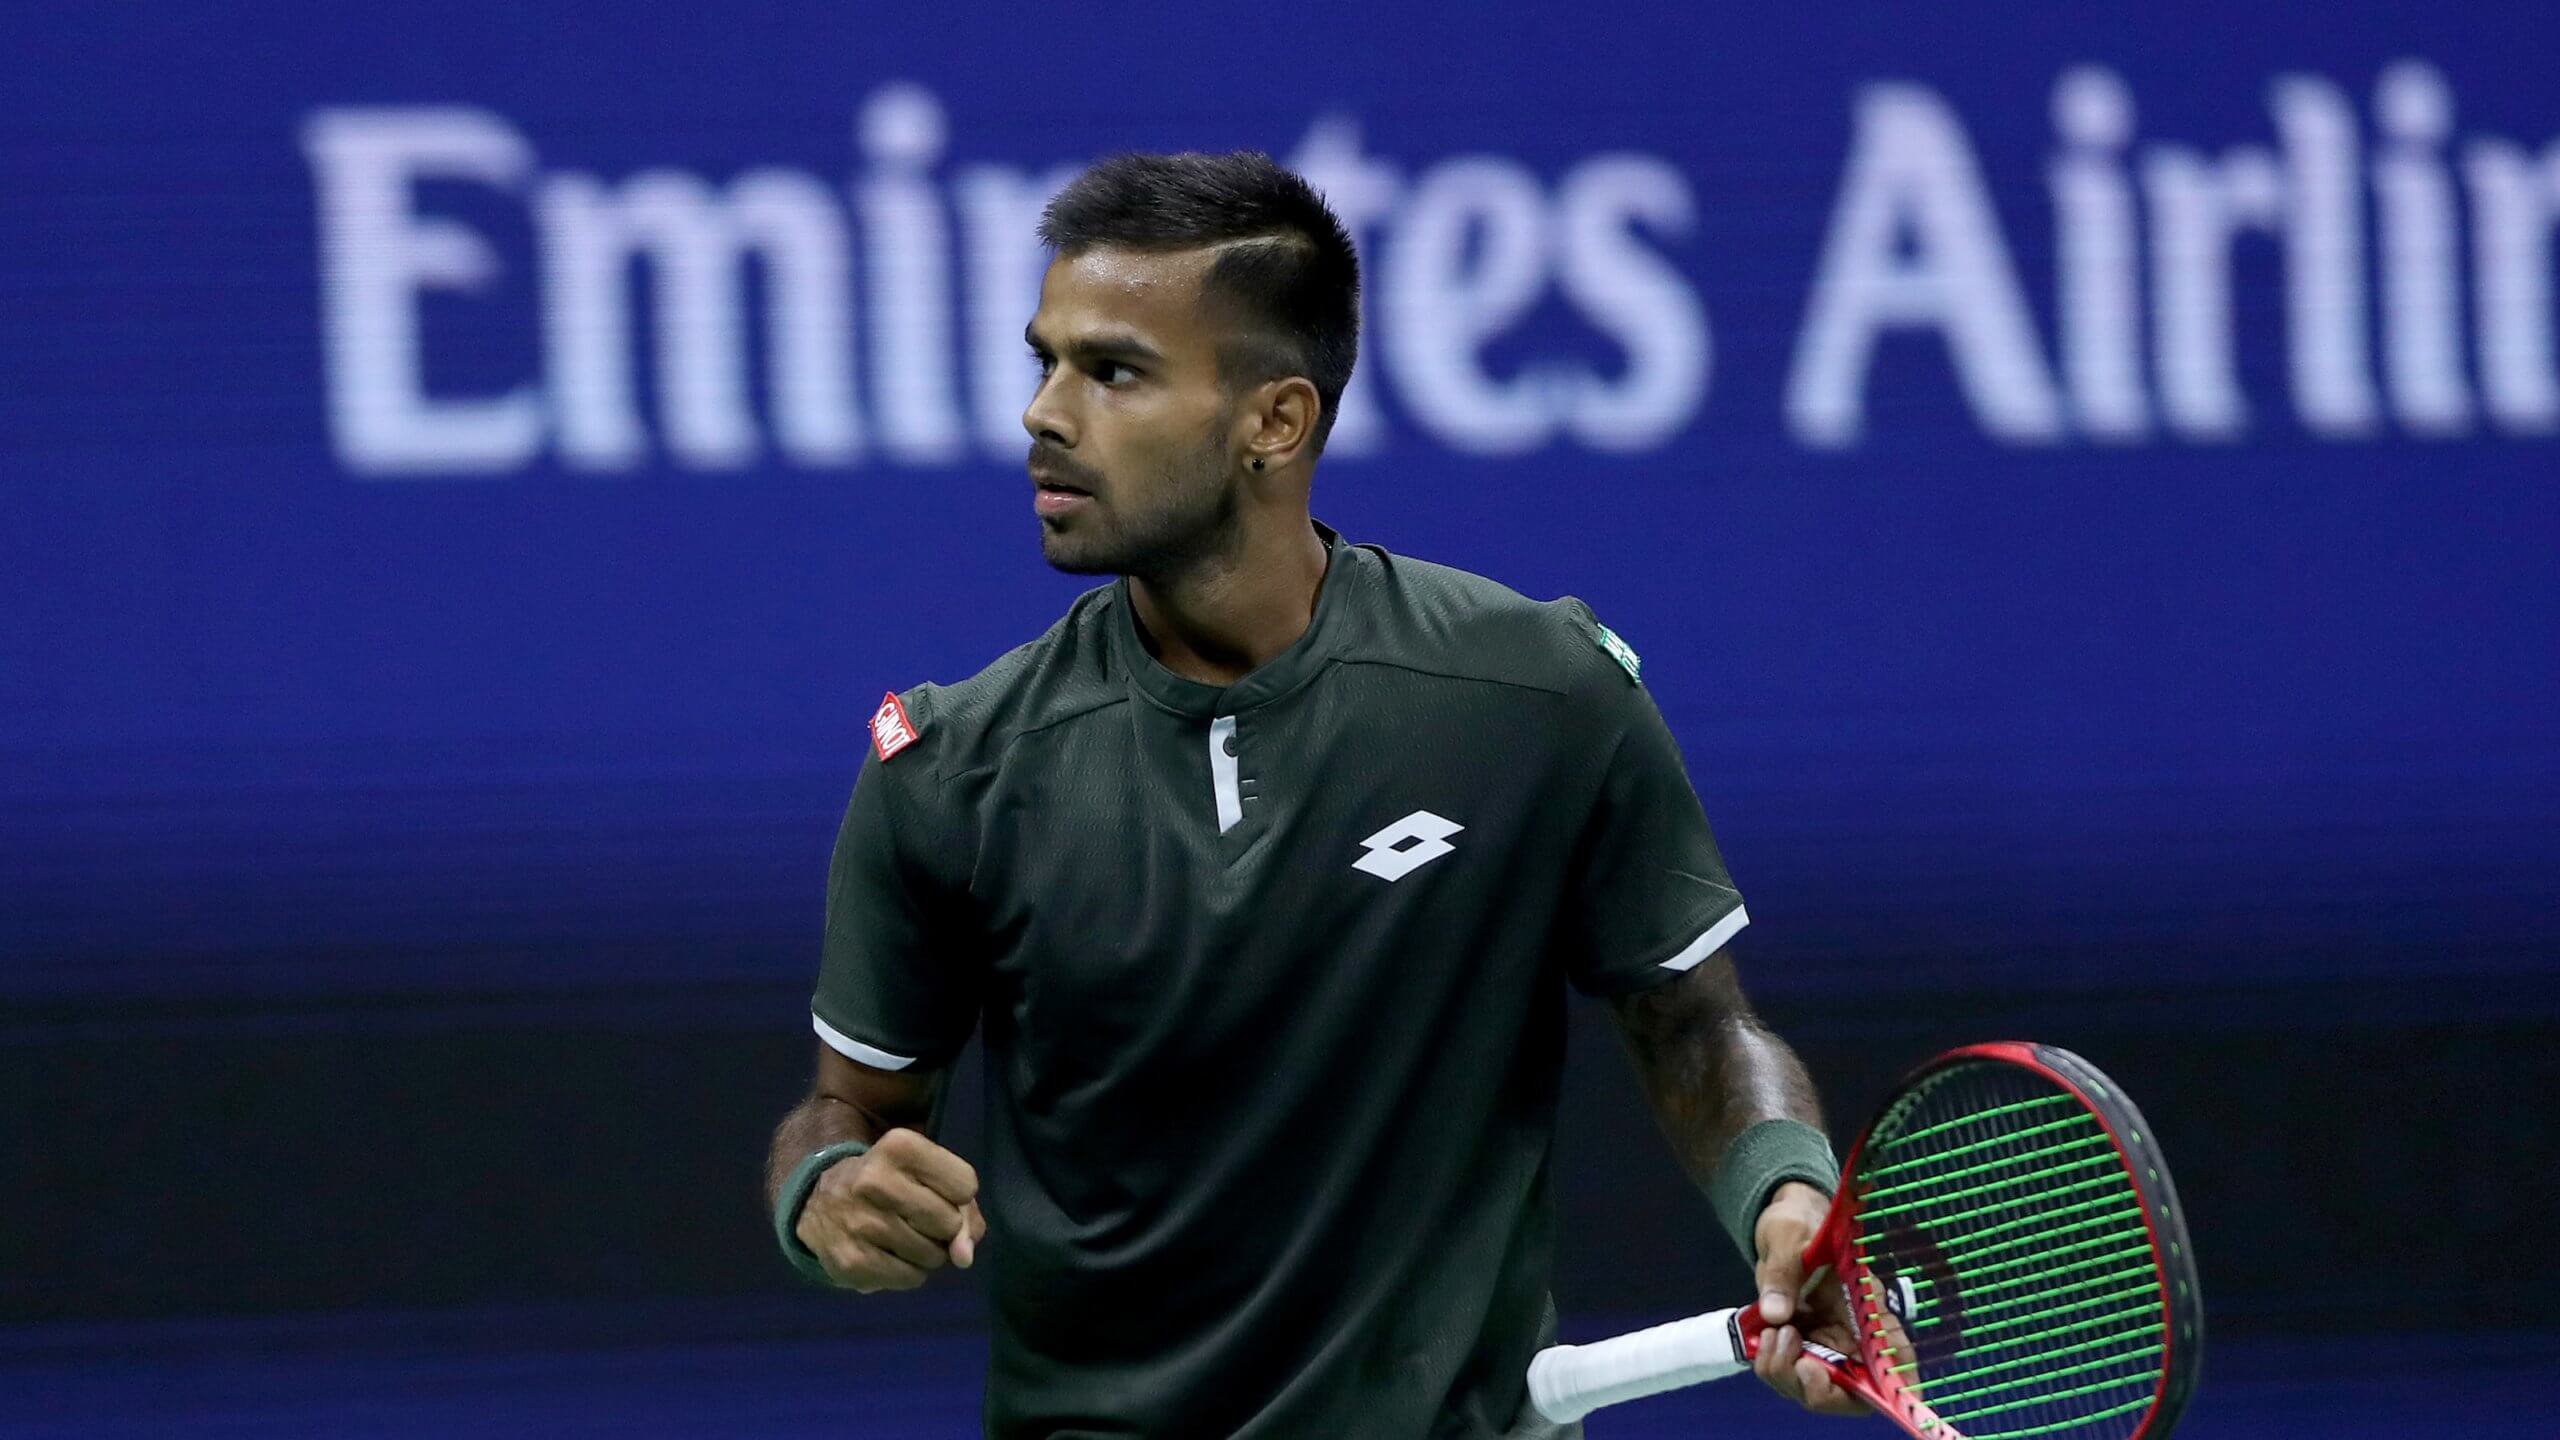 Australian Open Sumit Nagal suffers first-round loss, bows out of tournament